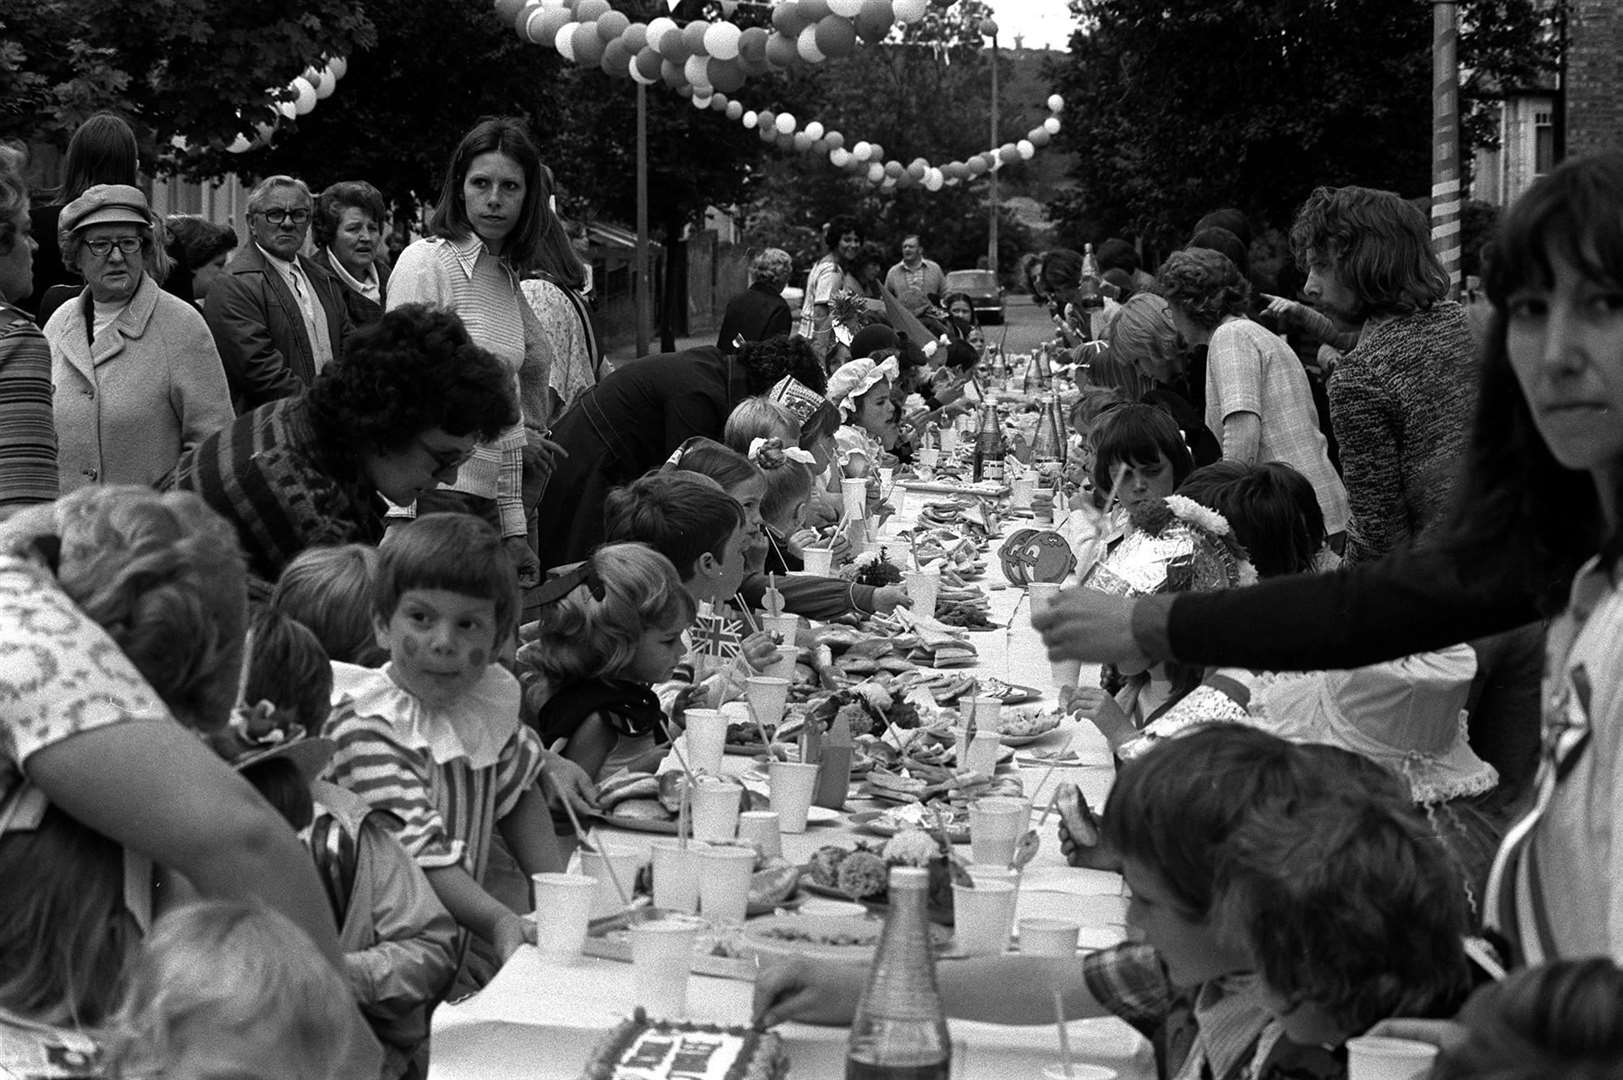 Residents of Woodford Bridge, Essex, celebrate the Queen’s Silver Jubilee with a street party for local children in 1977 (PA)